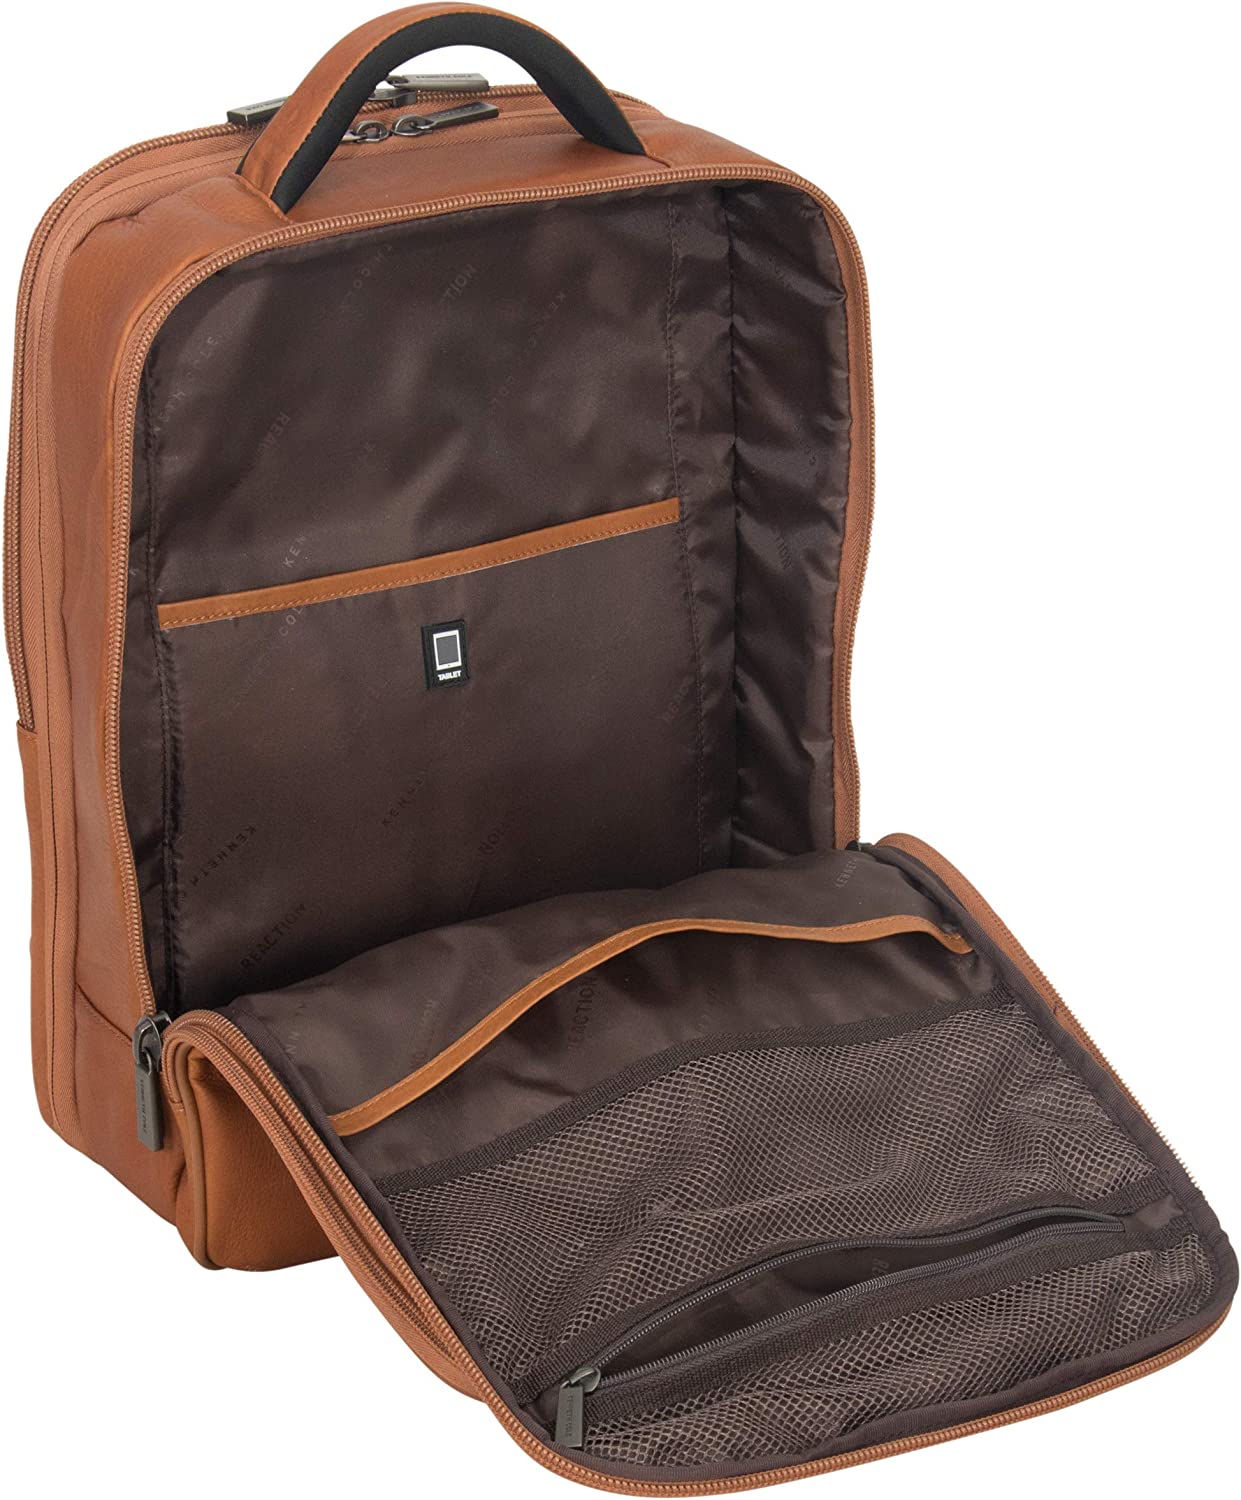 Kenneth Cole Reaction Manhattan Commuter Slim Backpack Review